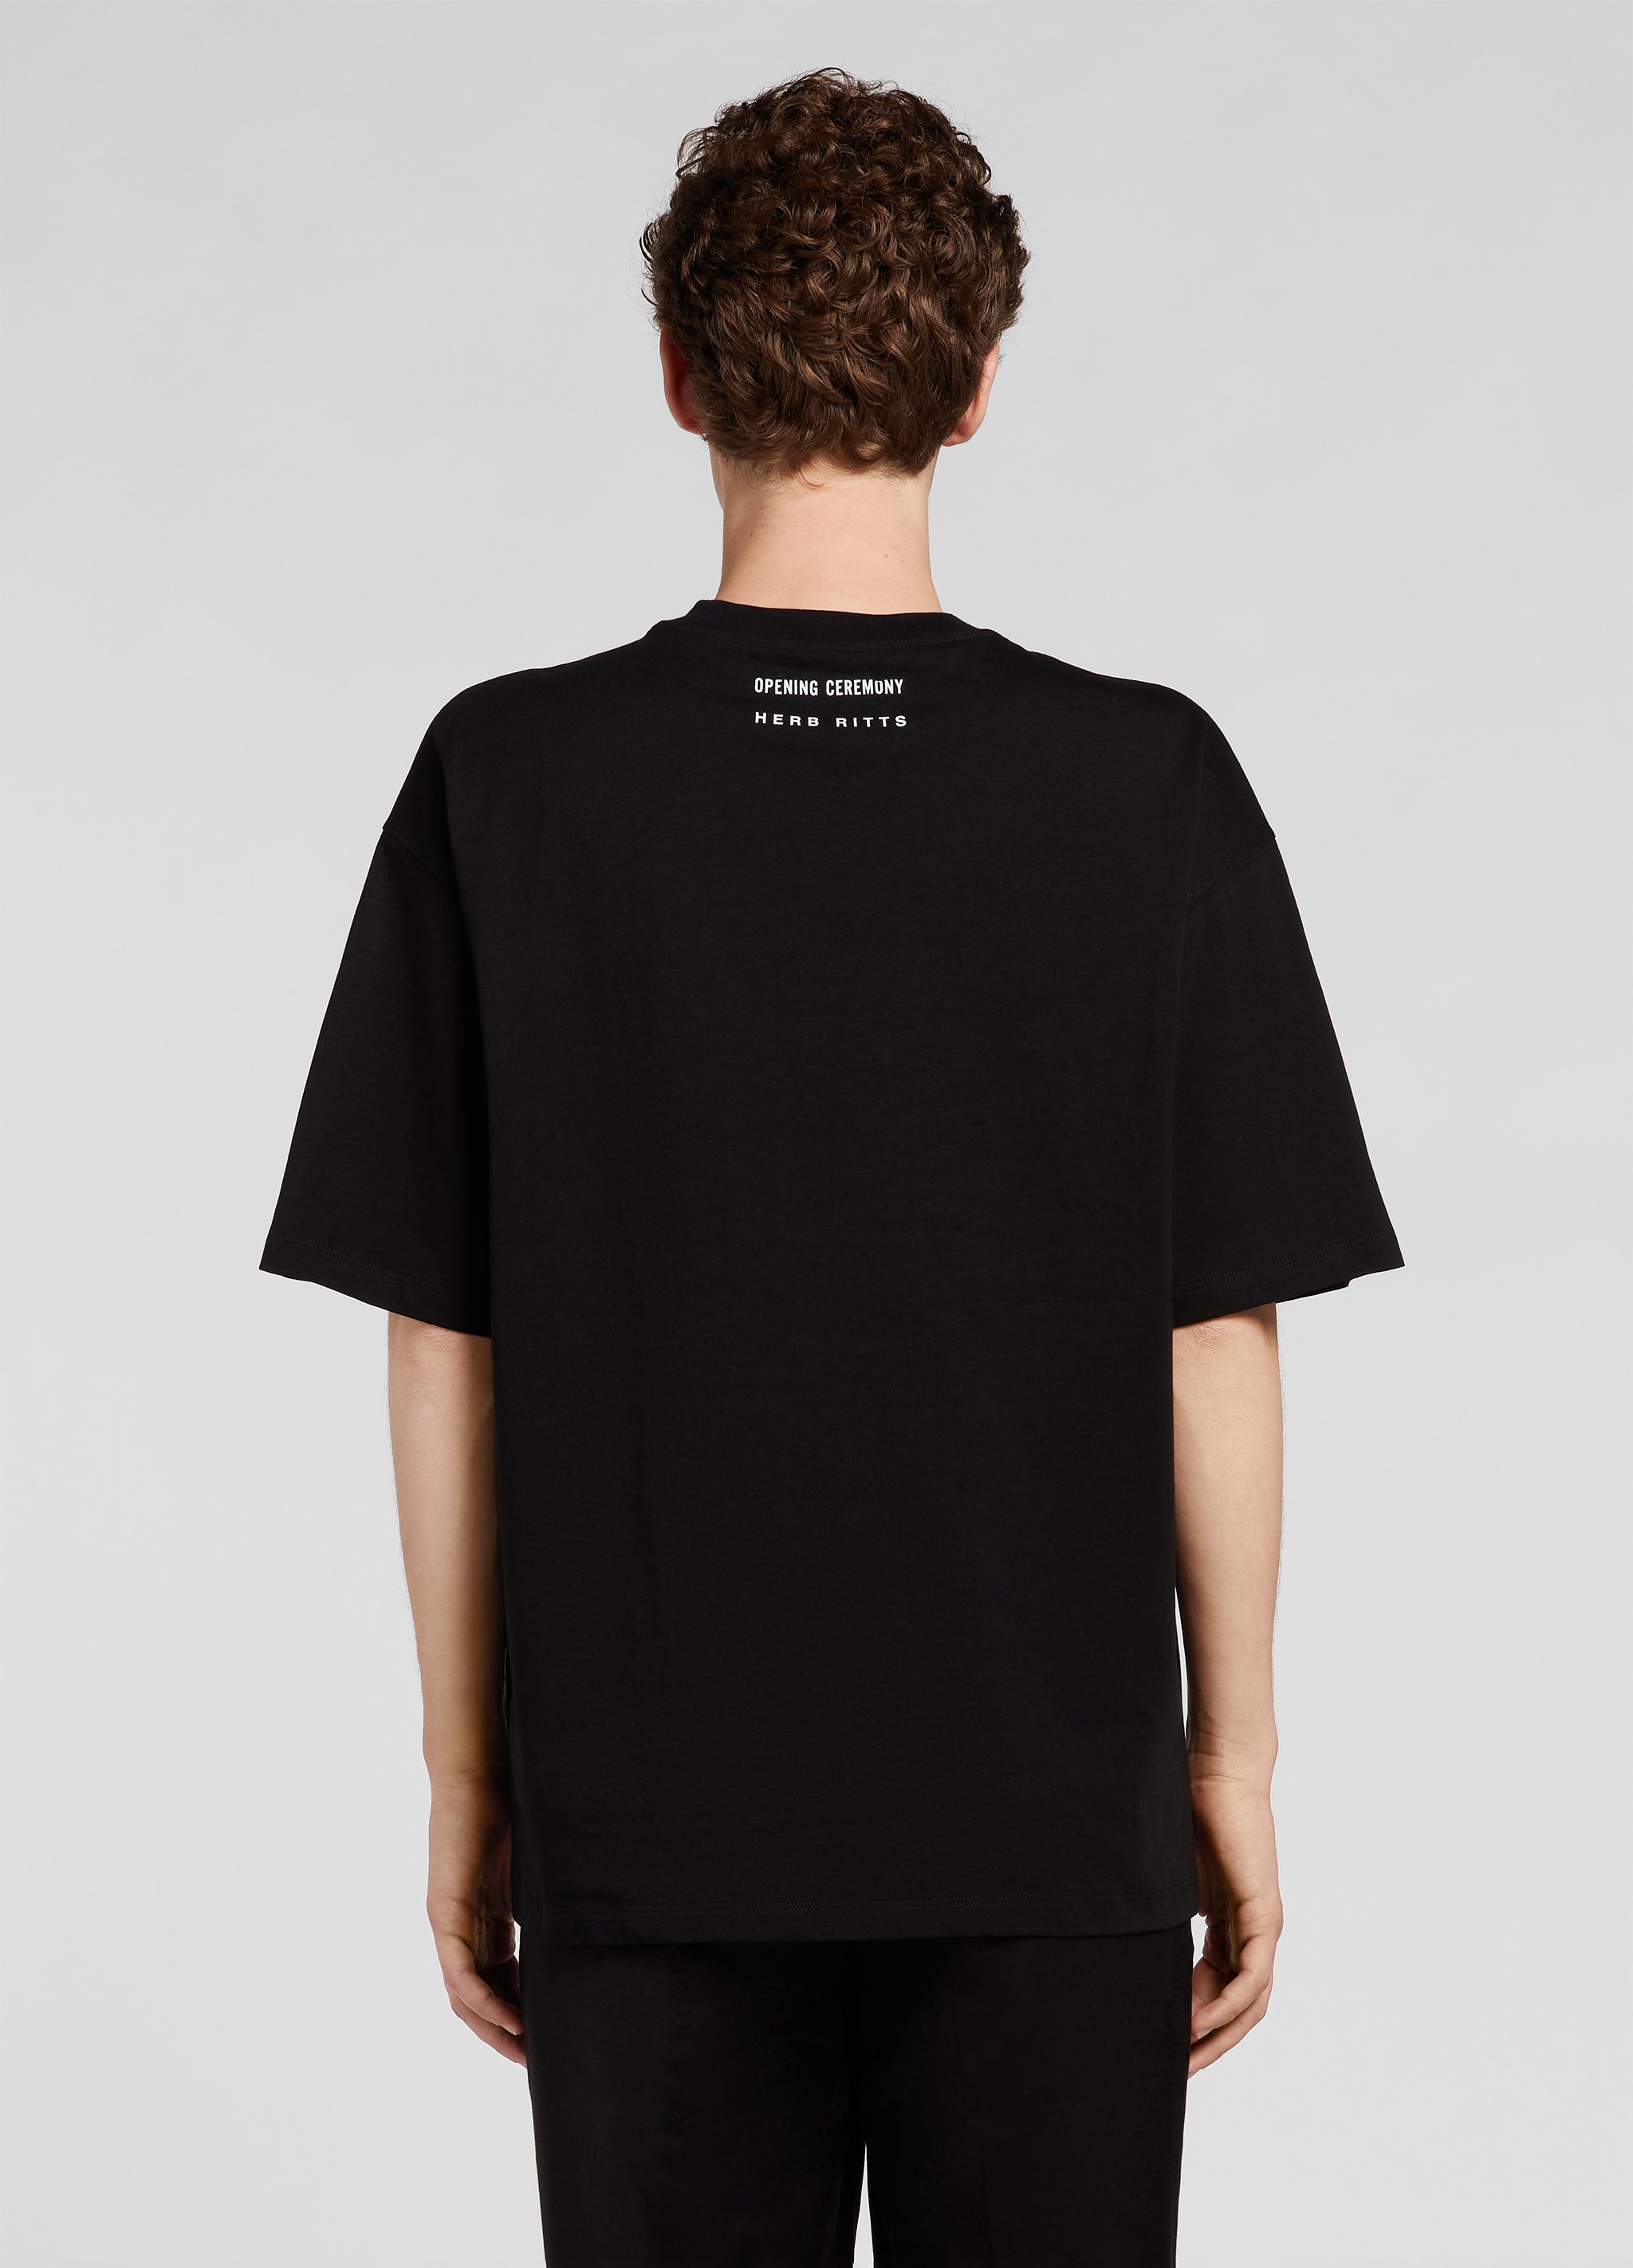 OPENING CEREMONY X HERB RITTS  PRIDE S/S T-SHIRT